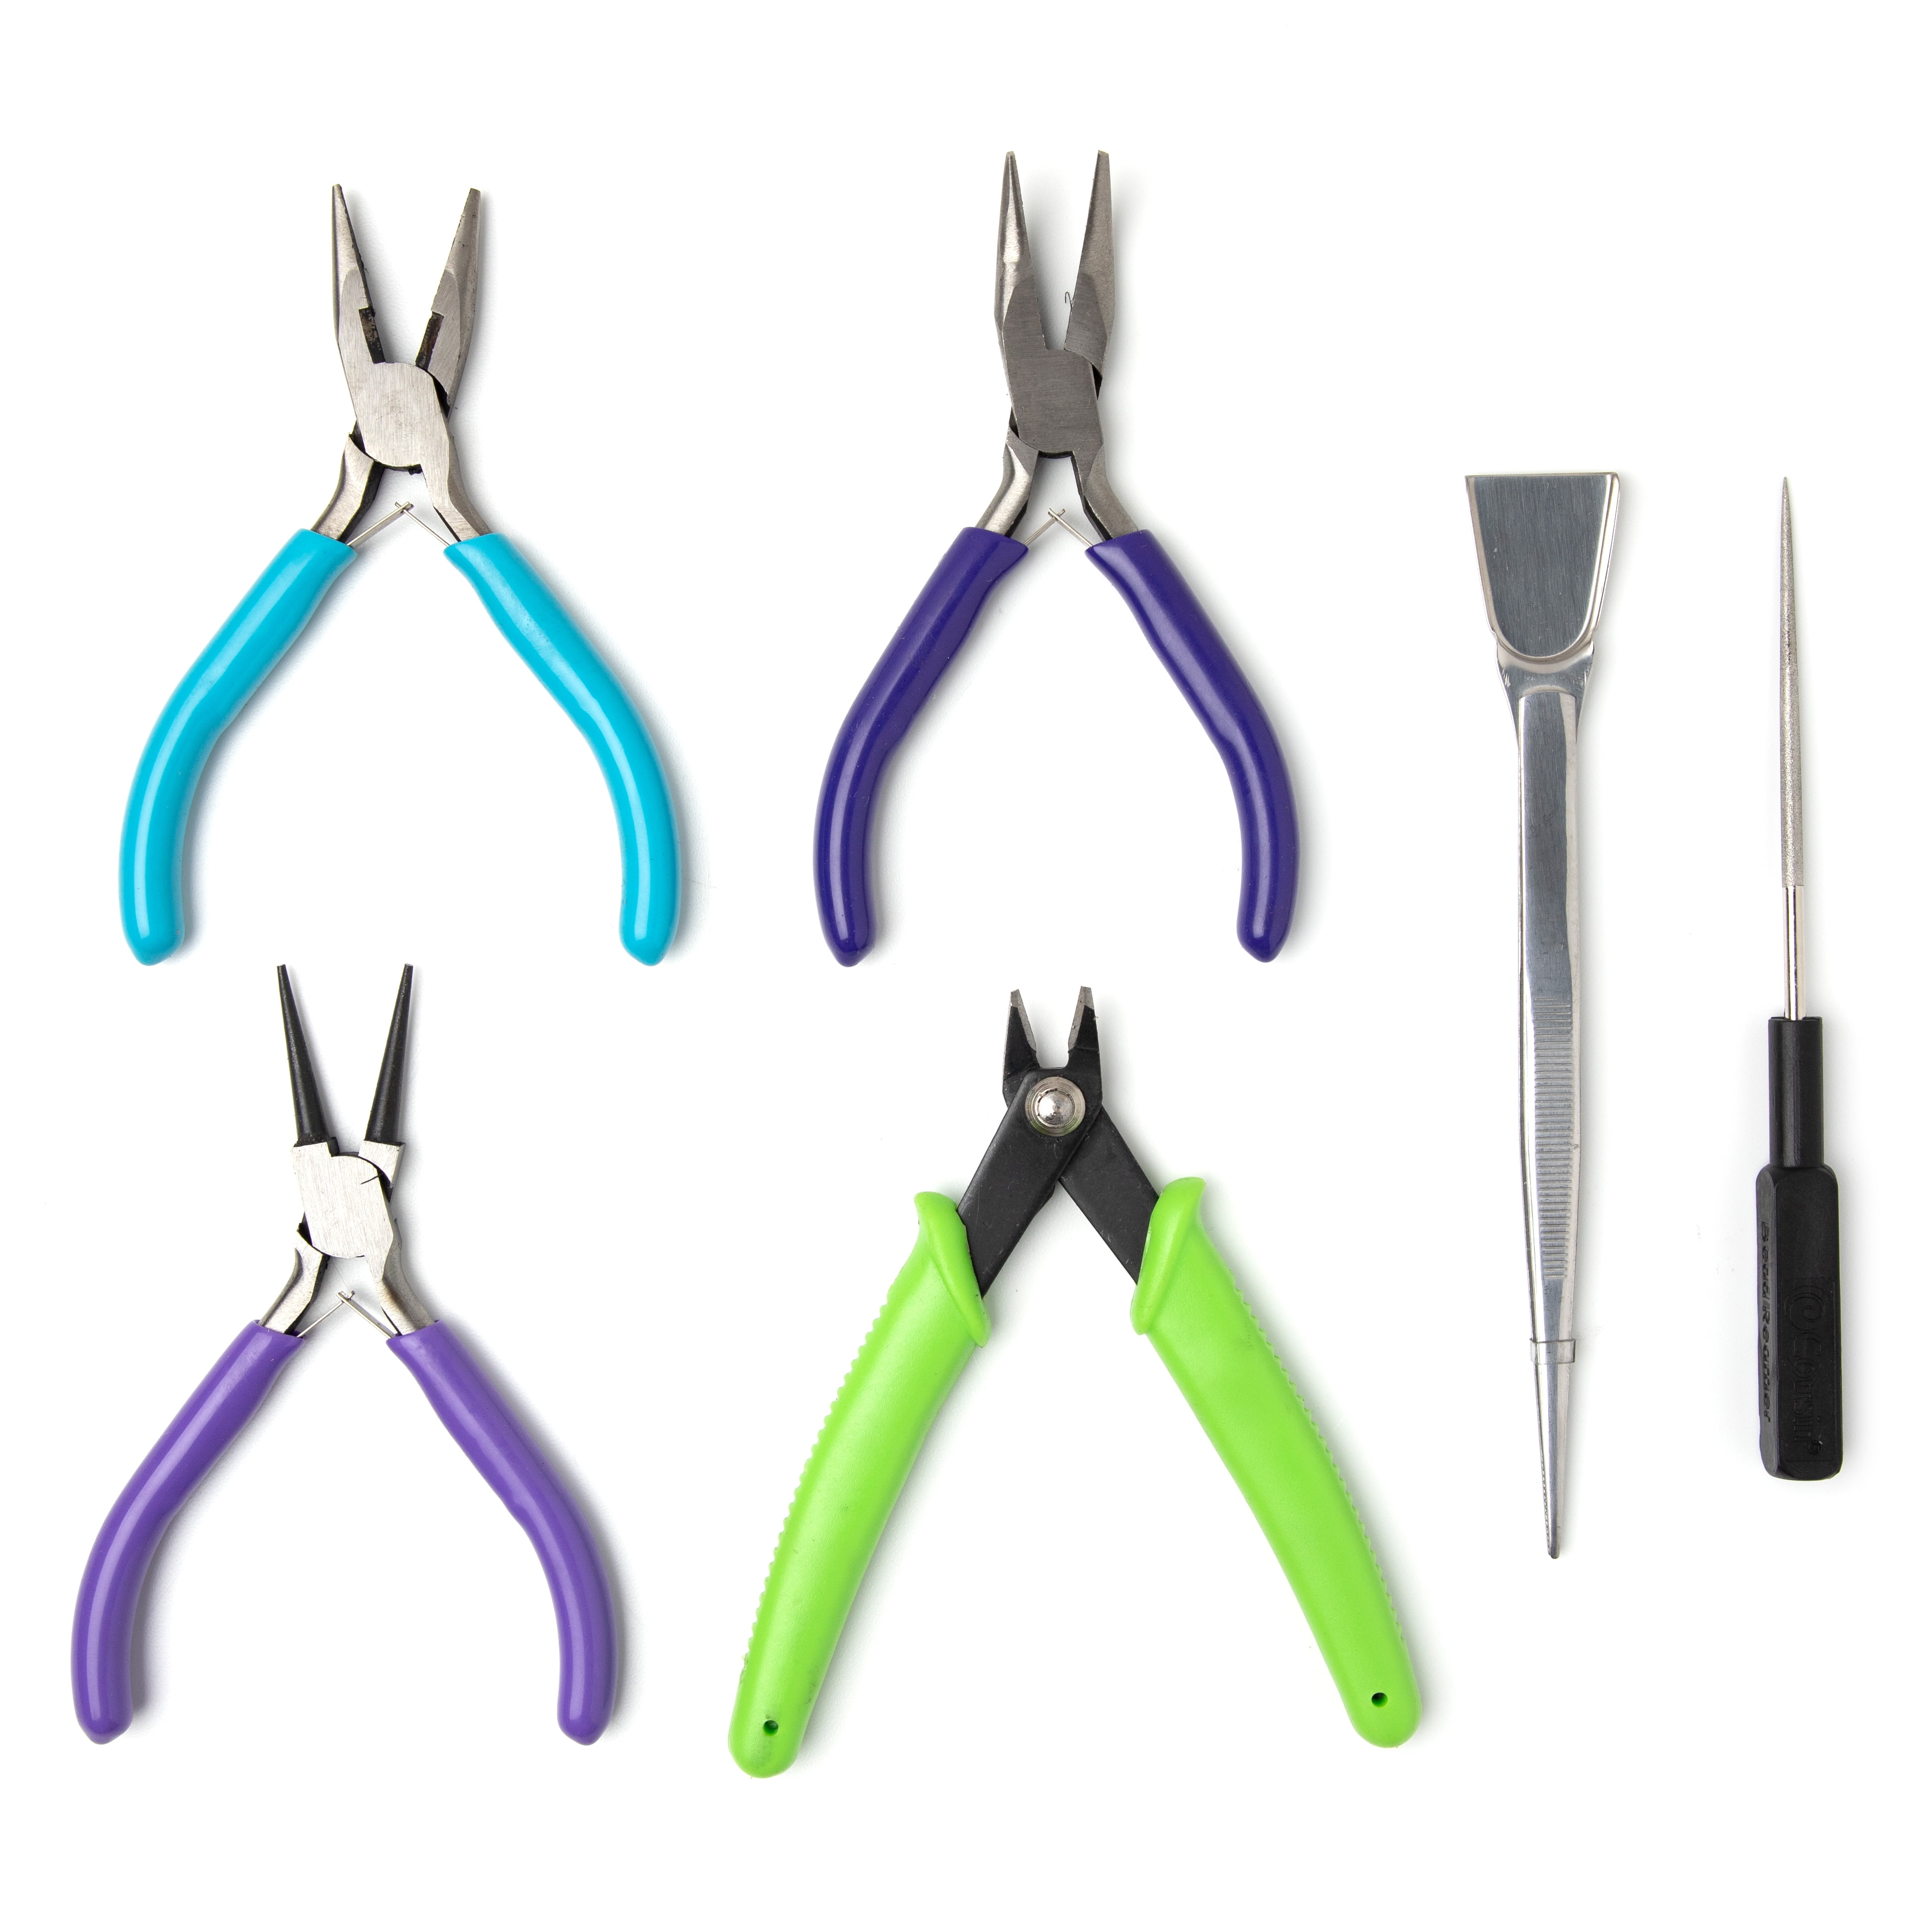  Cousin Precision Comfort Tool Kit Jewelry-Making-Pliers, Black